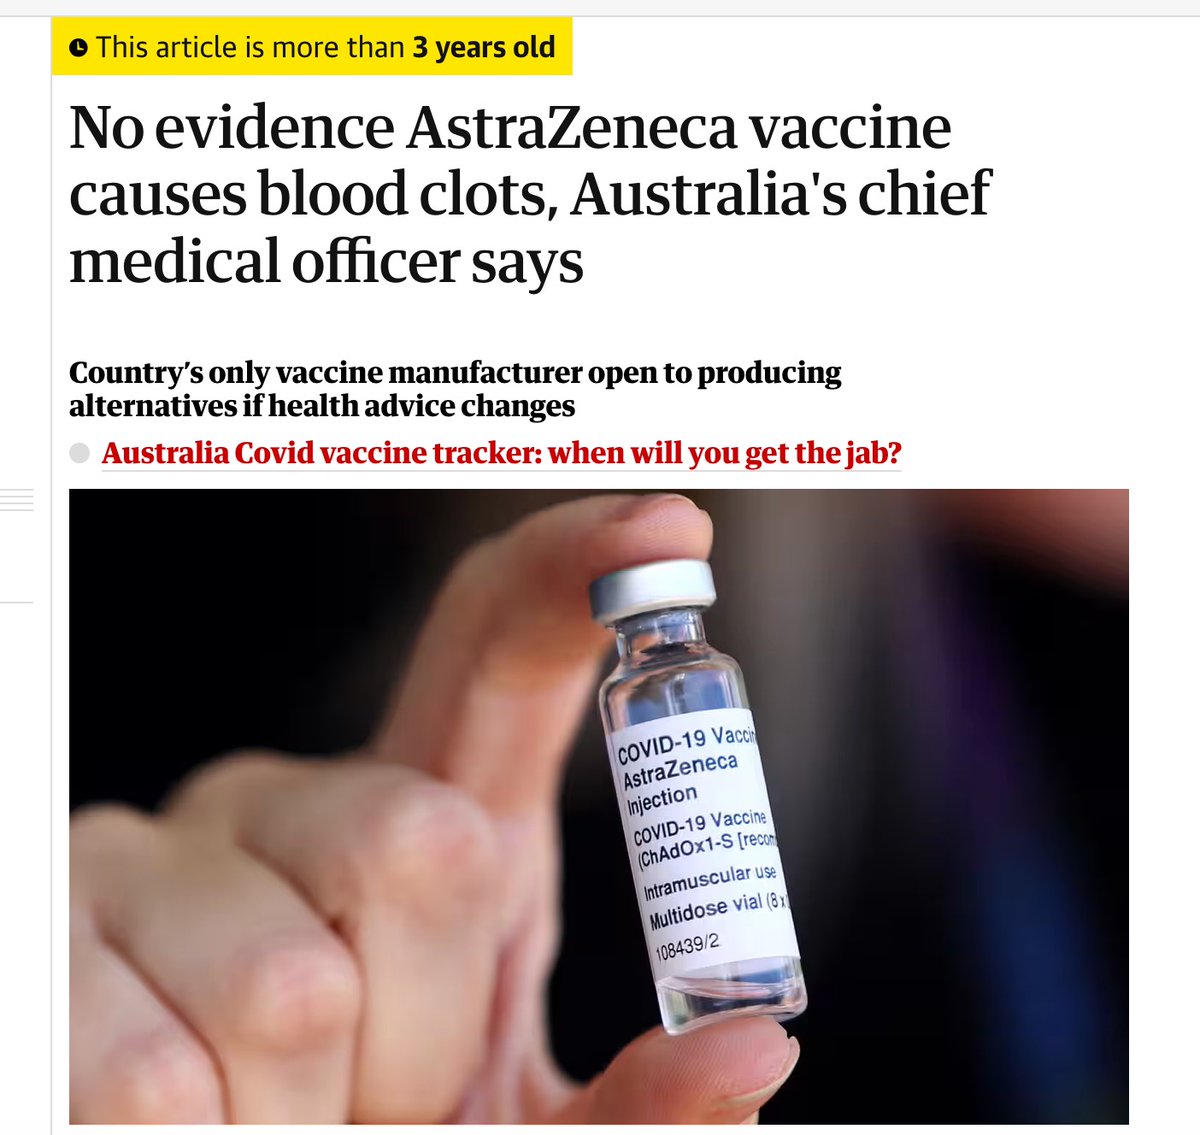 Let's take a look back at what Australia's Chief Medical Officer was telling us all in 2021. Was Professor Paul Kelly lying or just incompetent? This should serve as an important lesson. The 'experts' are not always correct, and where there is risk, there must be choice.